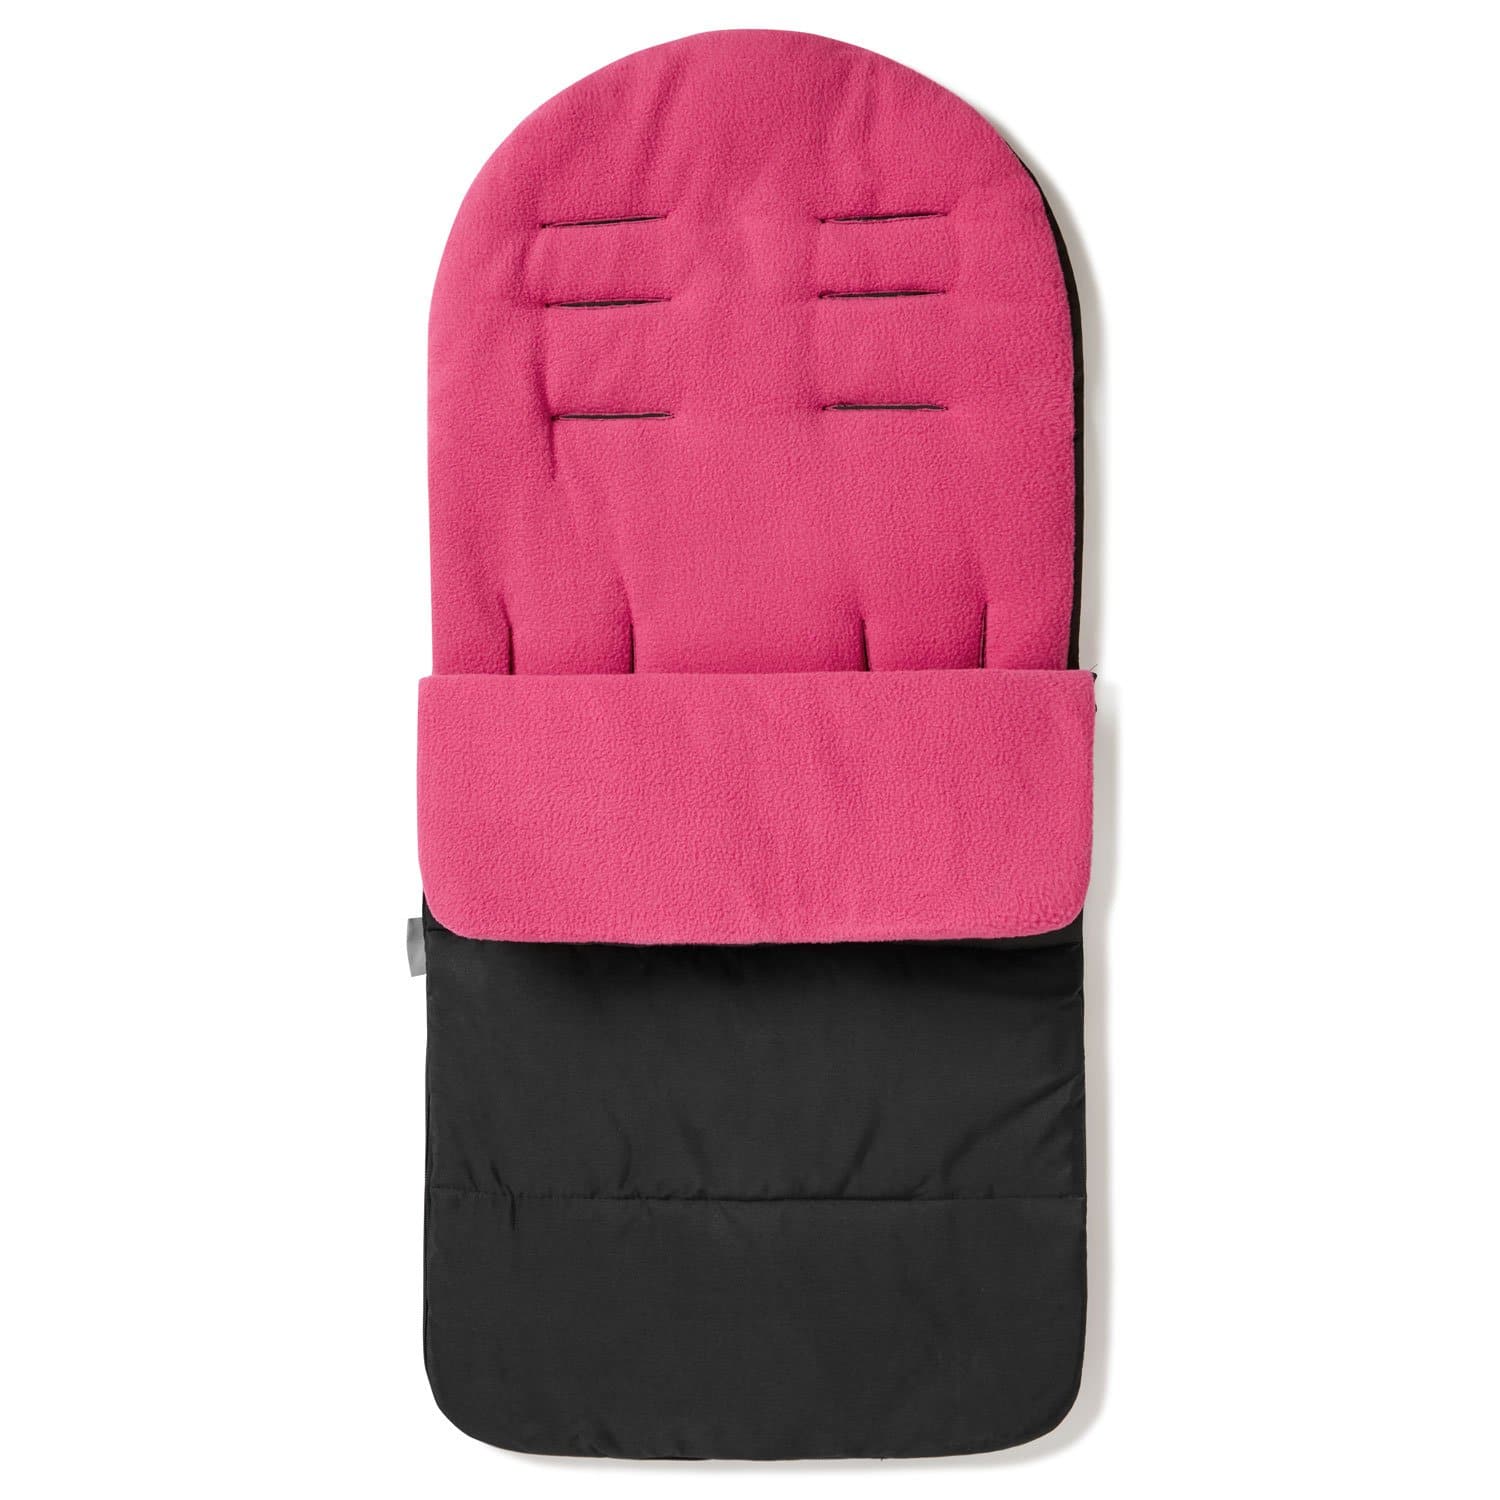 Premium Footmuff / Cosy Toes Compatible with My Child - For Your Little One